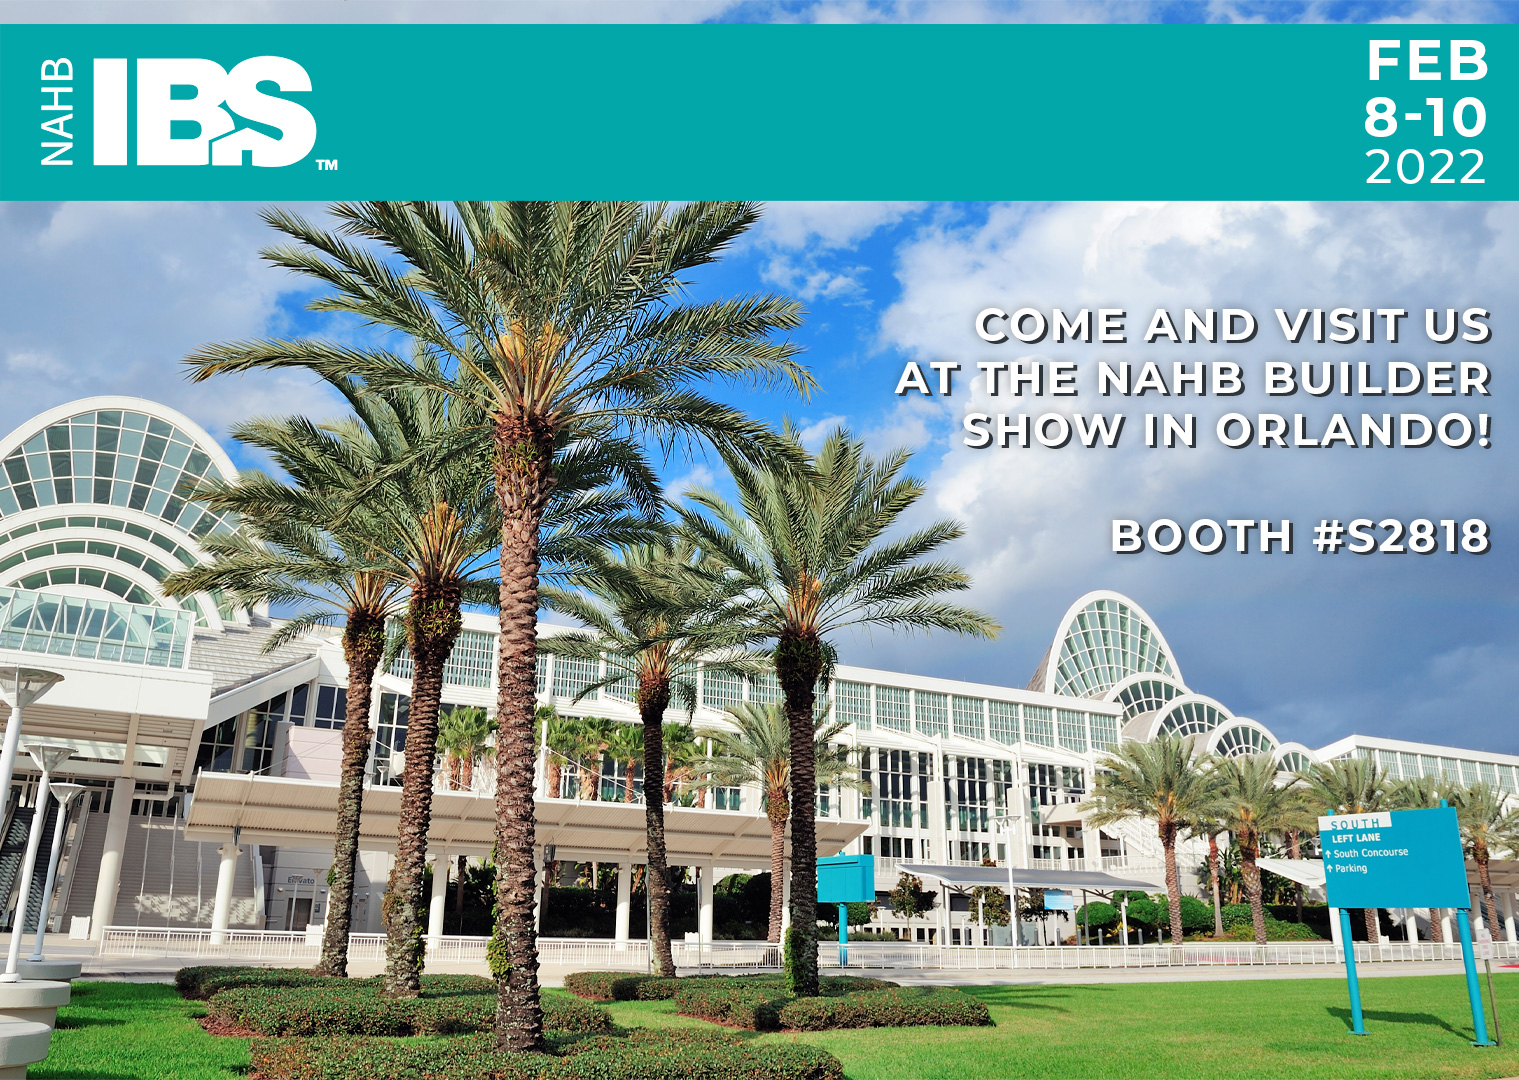 Come and Visit us at The NAHB Builder Show in Orlando! FEB 8-10, 2022 Booth #S2818